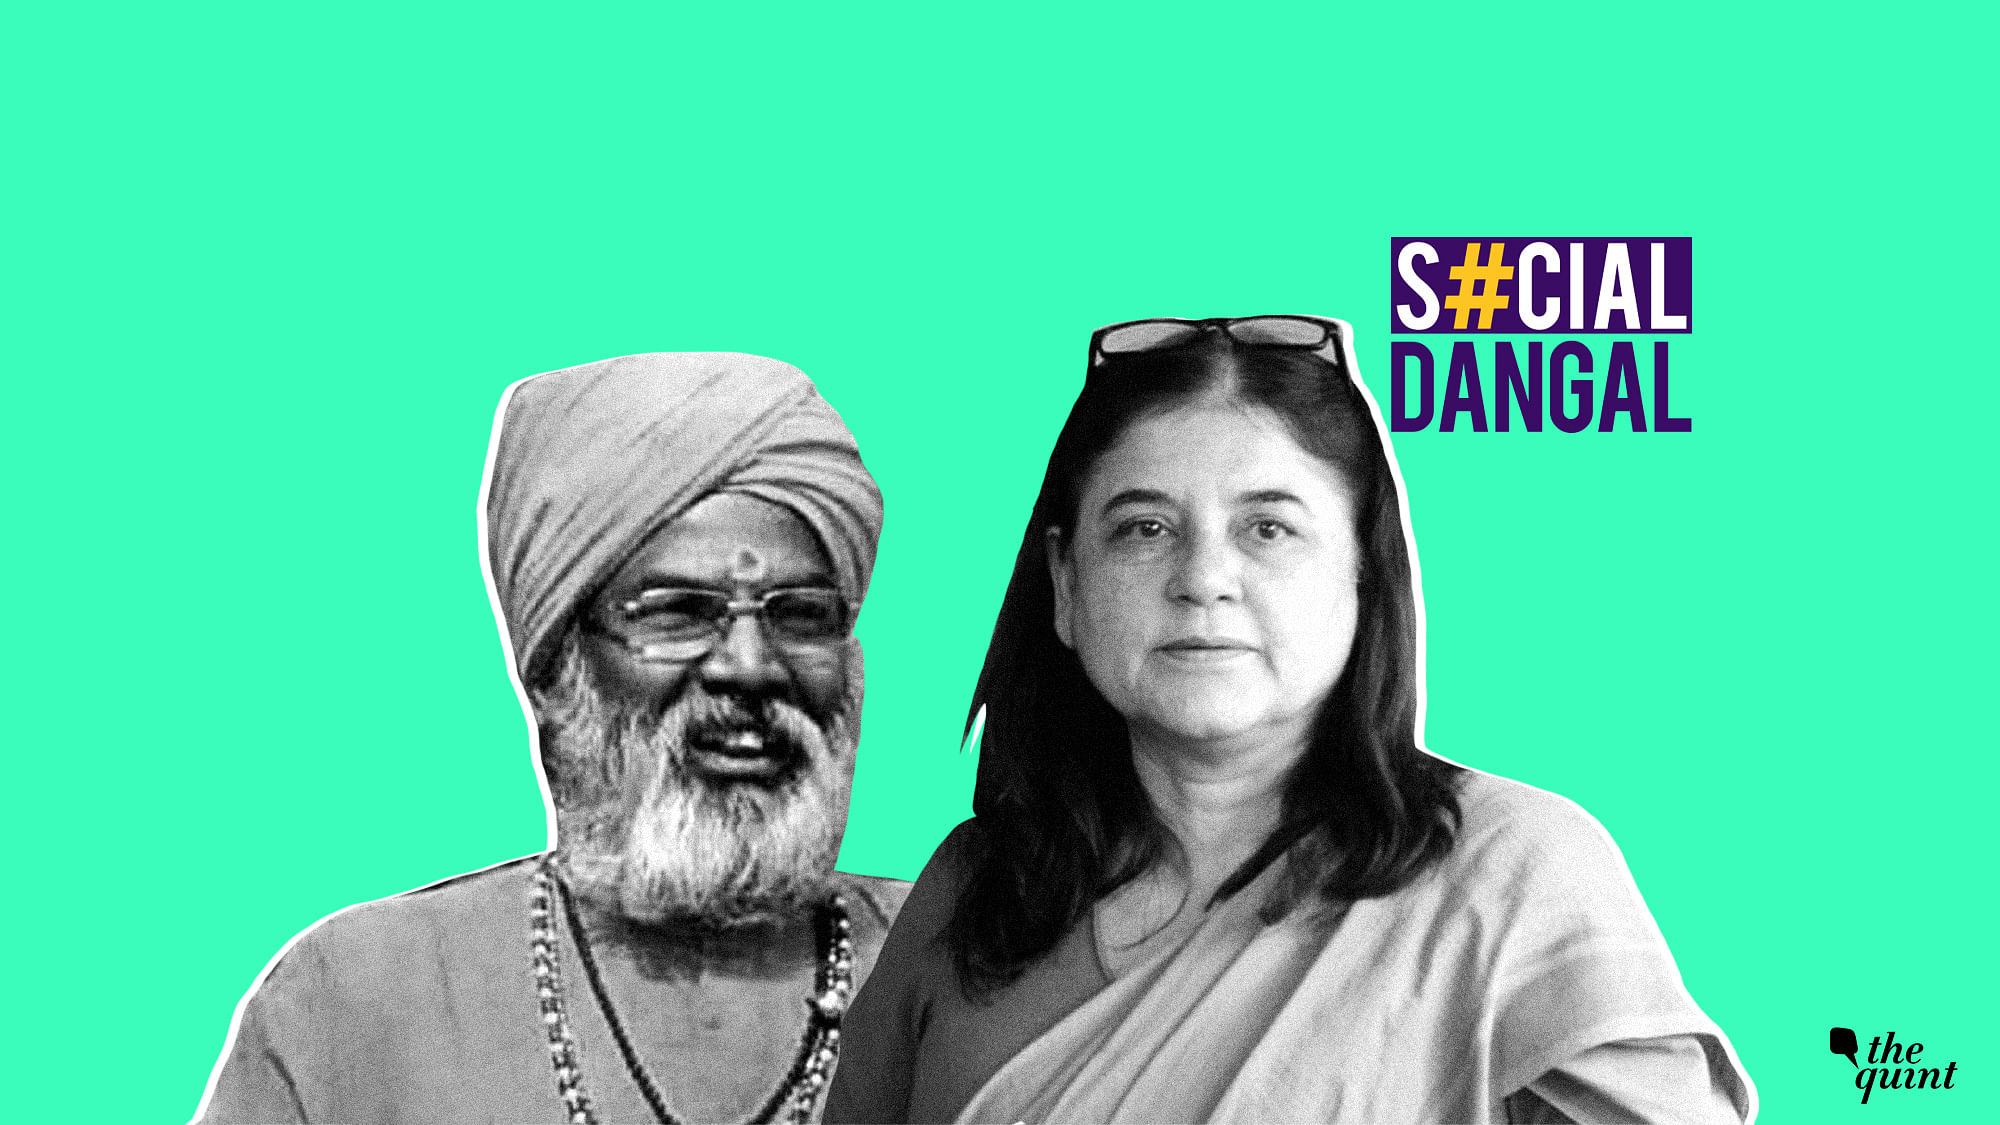 Twitterati criticised both Sakshi Maharaj and Maneka Gandhi for their speeches filled with threats.